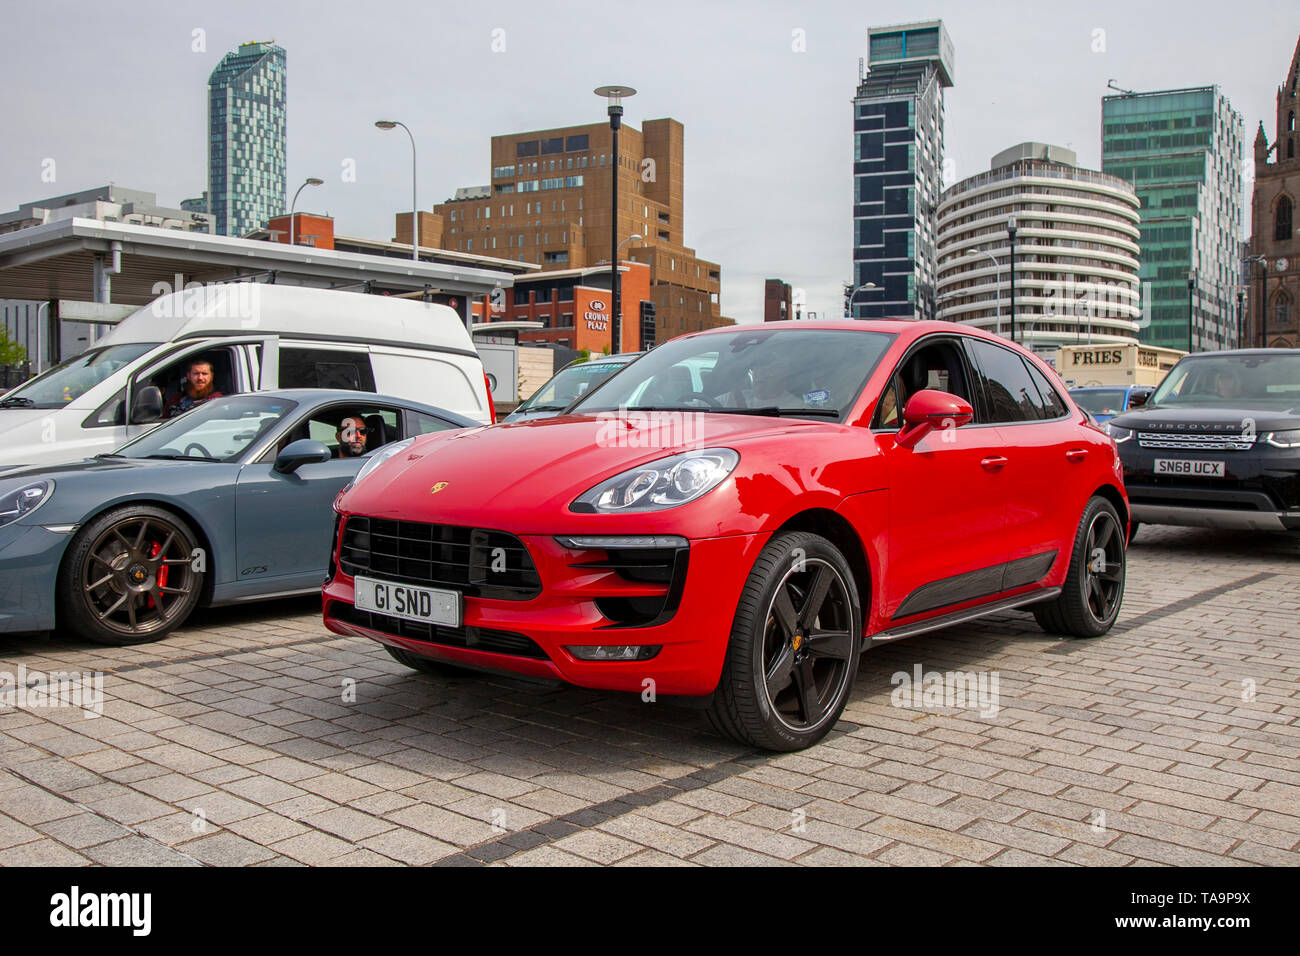 Liverpool, Merseyside. 23rd May, 2019 UK Weather: Fine, sunny sailing condition as up to 200 motorcyclists and tens of supercars including a Porsche Macan S D S-A, queue to board the ferry to the Isle of Man to attend the island TT races.  Extra ferry services are to be added to cope with the large demand for spectators travelling to attend this year’s top motor sport week of qualifying events of the fastest road race on the planet. Credit: MediaWorldImages/AlamyLiveNews Stock Photo